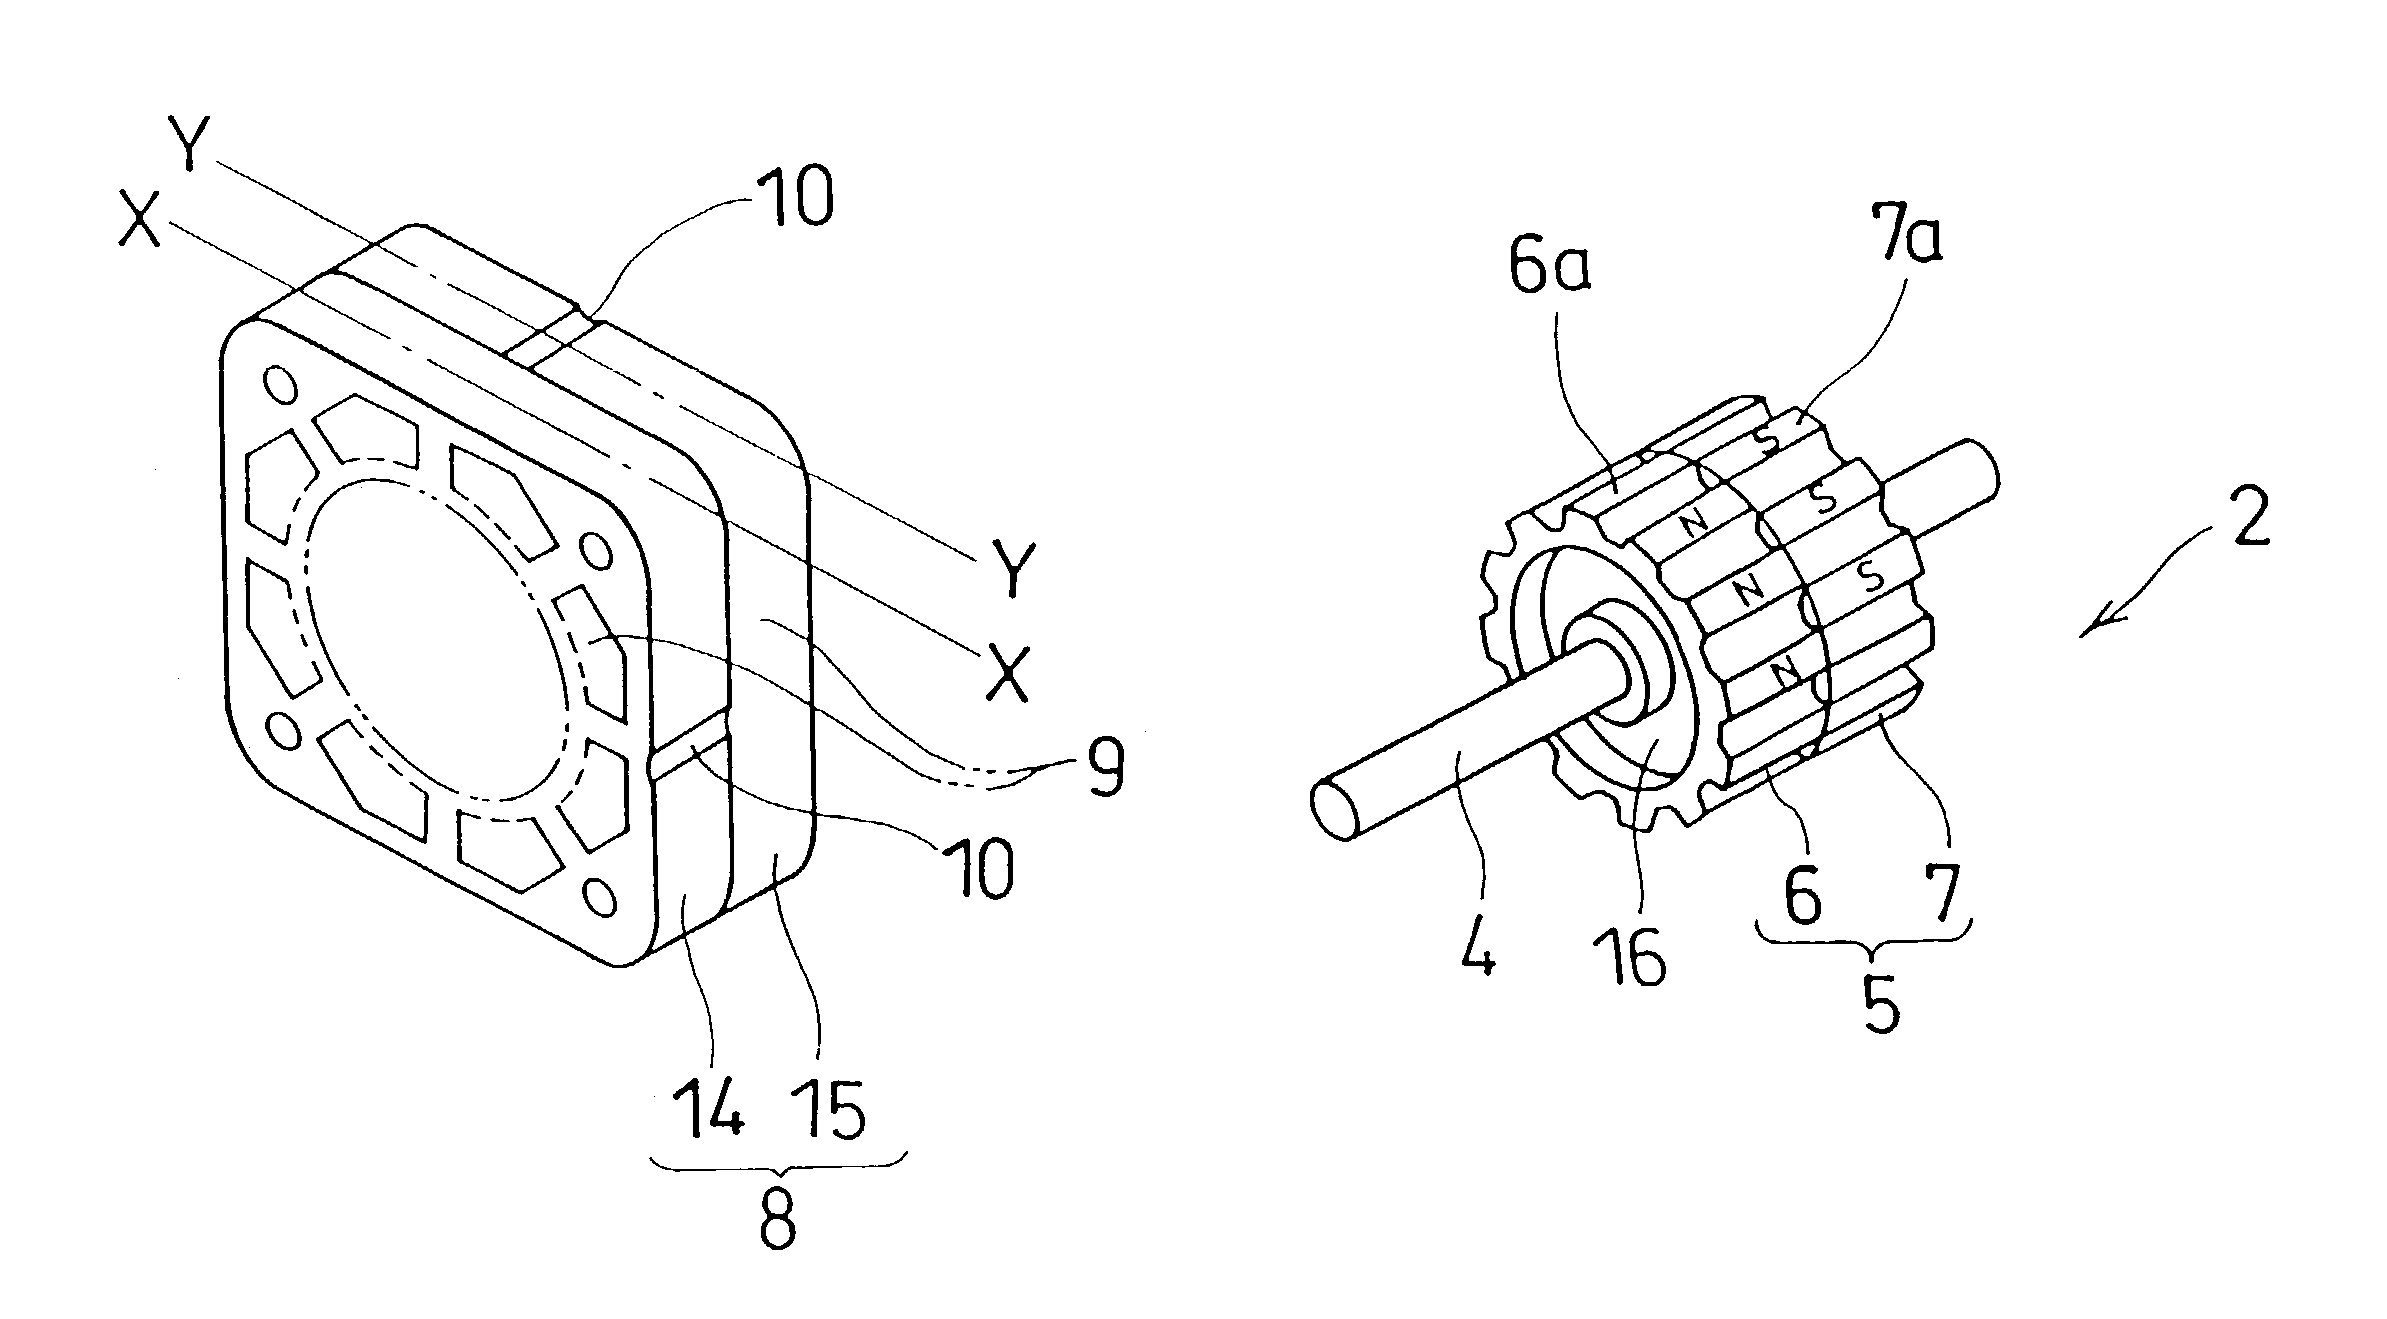 Structure of rotors in stepping motors